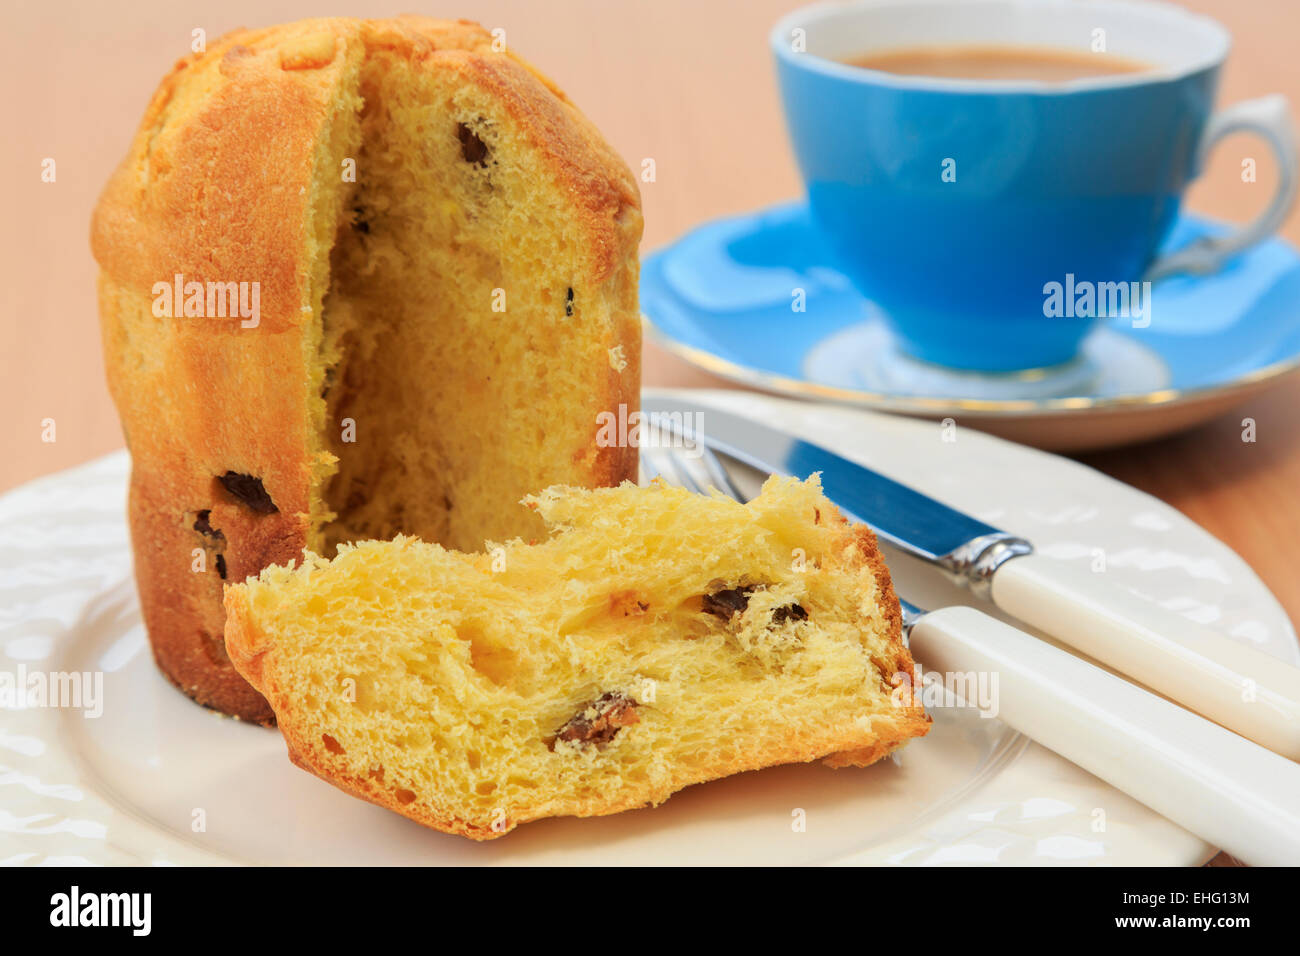 A slice of Panettone Italian Christmas fruit bread cake on a plate with a cup of tea on a table top. England UK Britain Stock Photo